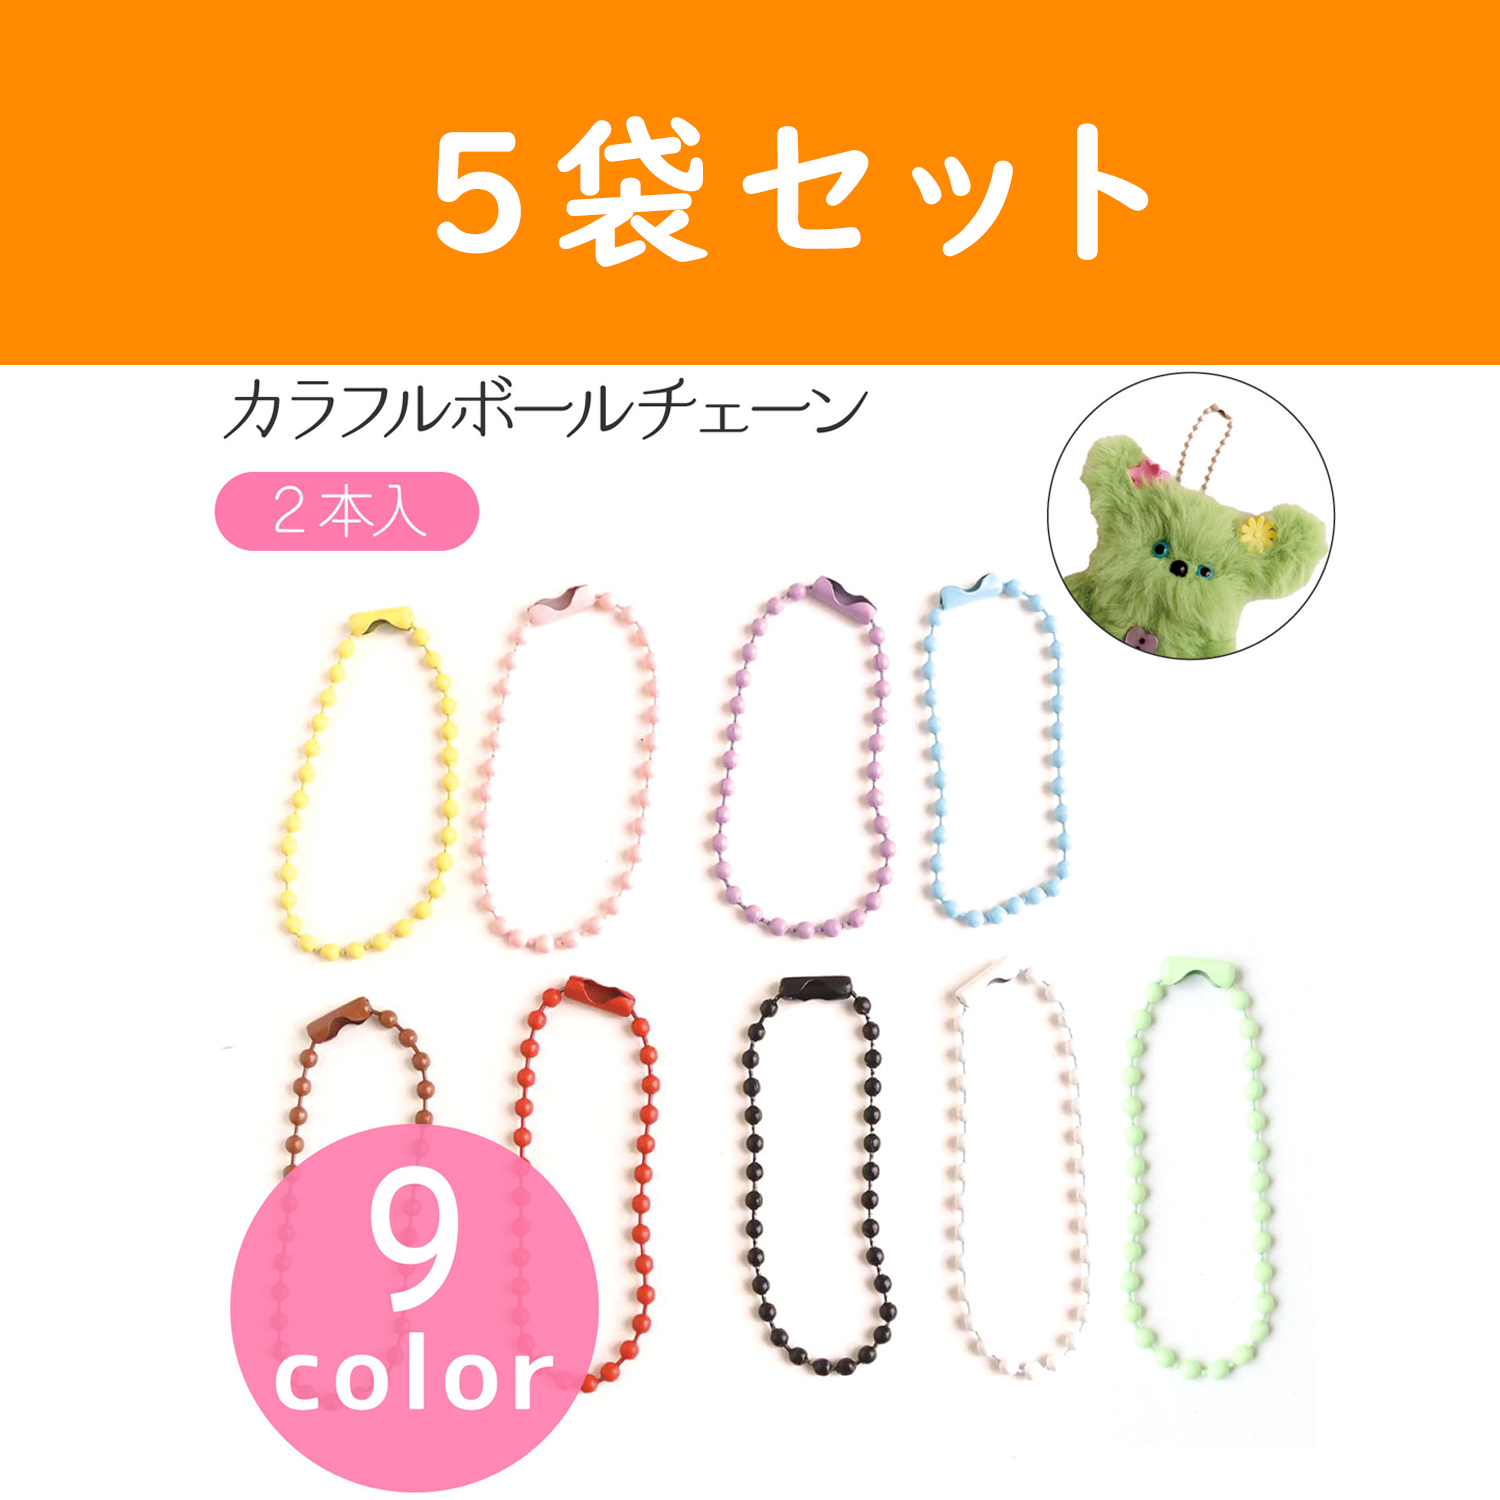 MOL-5 Molle Doll Korean Goods Colorful Ball Chain 2 Pieces×5 pack set (Set)